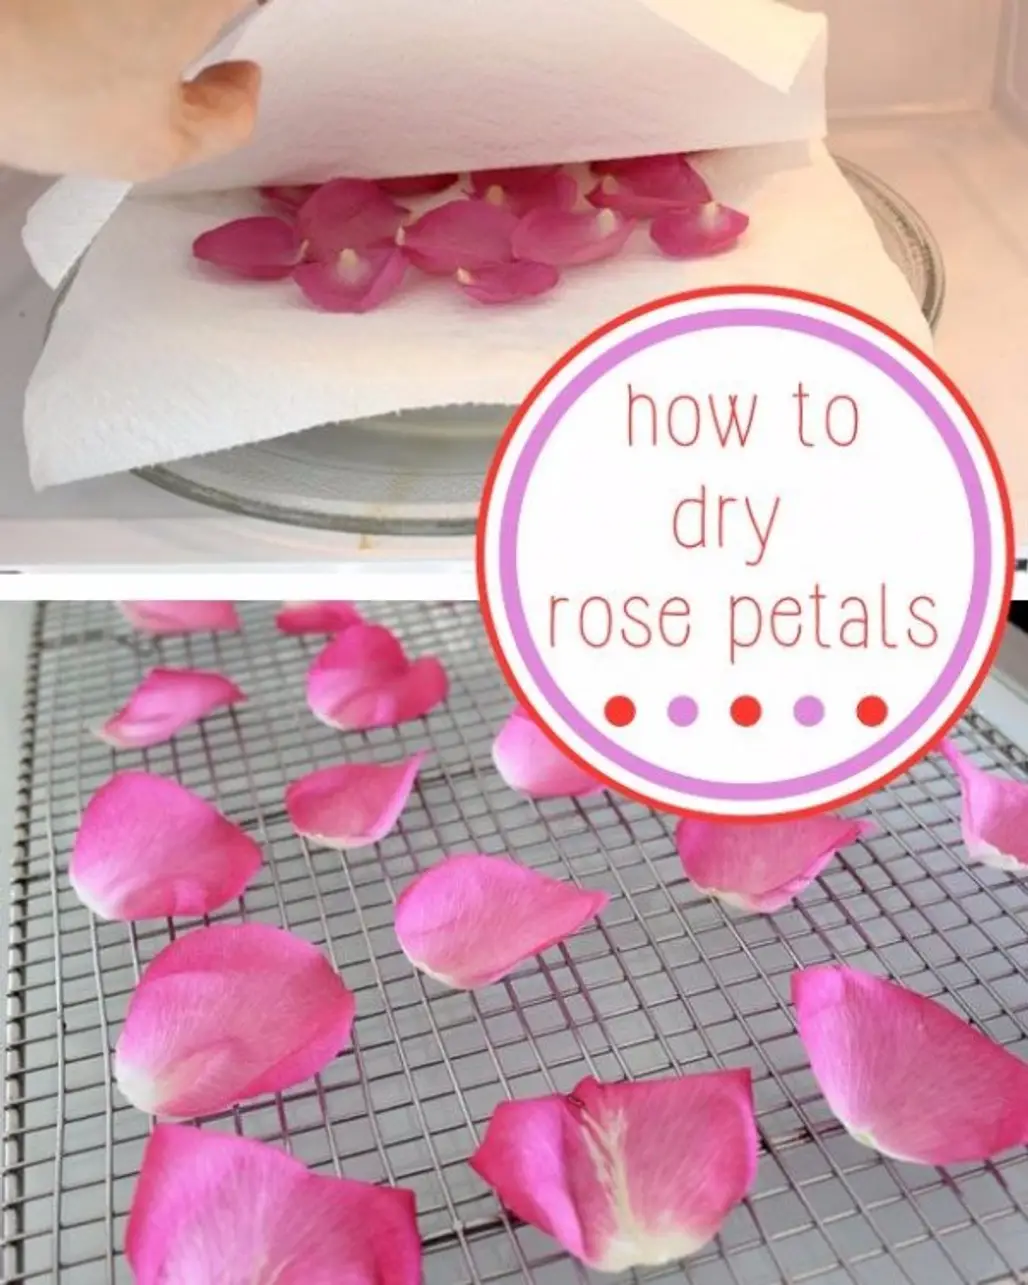 This is the Best Way to Preserve the Beauty and Fragrance of Beautiful Roses